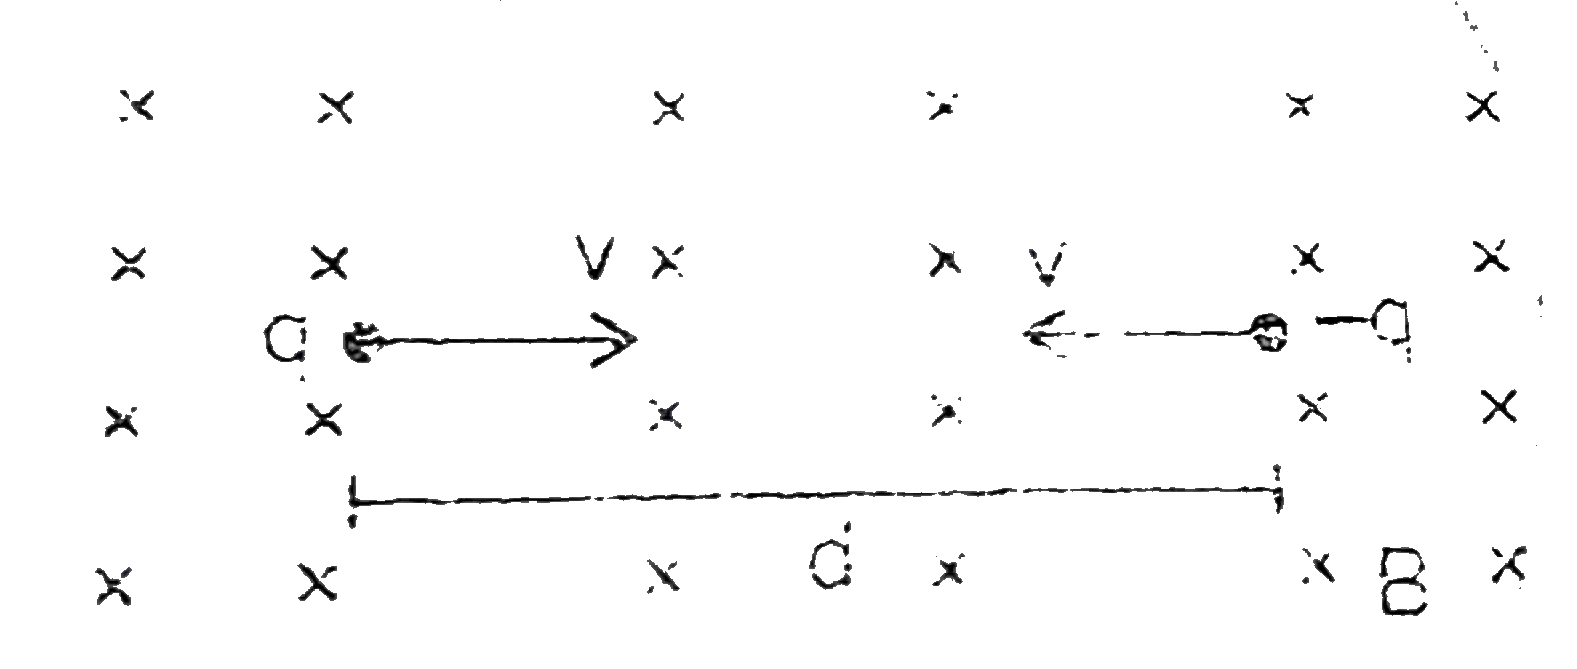 Two particle, each having a mass m are placed at a separation d in a uniform magnetic field B as shown in figure.They have opposite charges of equal magnitude q.At time t=0, the particles are projected towards each other, each with a speed v.   Suppose v=2v(m) and they stick to each other after the collision.Describe the motion after the collision (neglect the magnetic, gravitational & electric forces between charges).